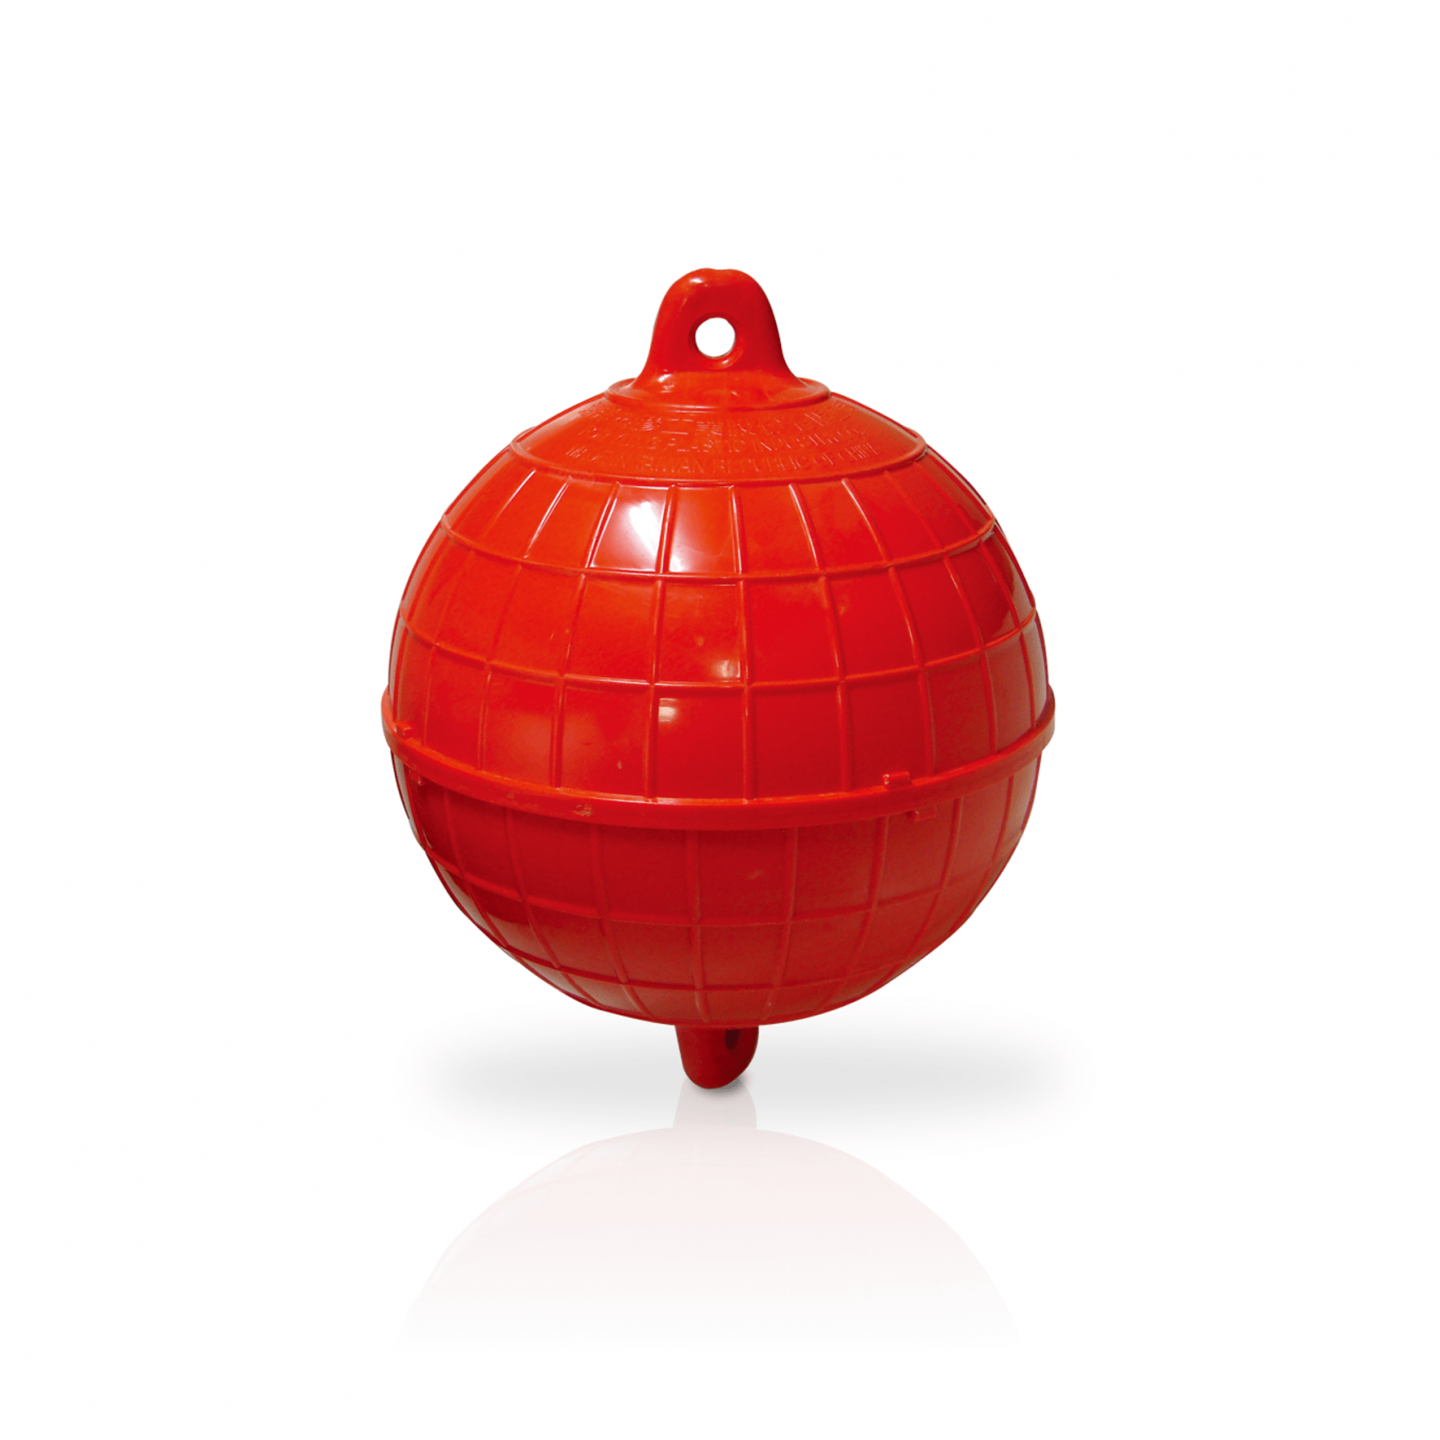 Commercial Fishing Float & Buoy, Long Line Fishing, Working Depth 360M,  Buoyancy 21.1KG - PRODUCTS